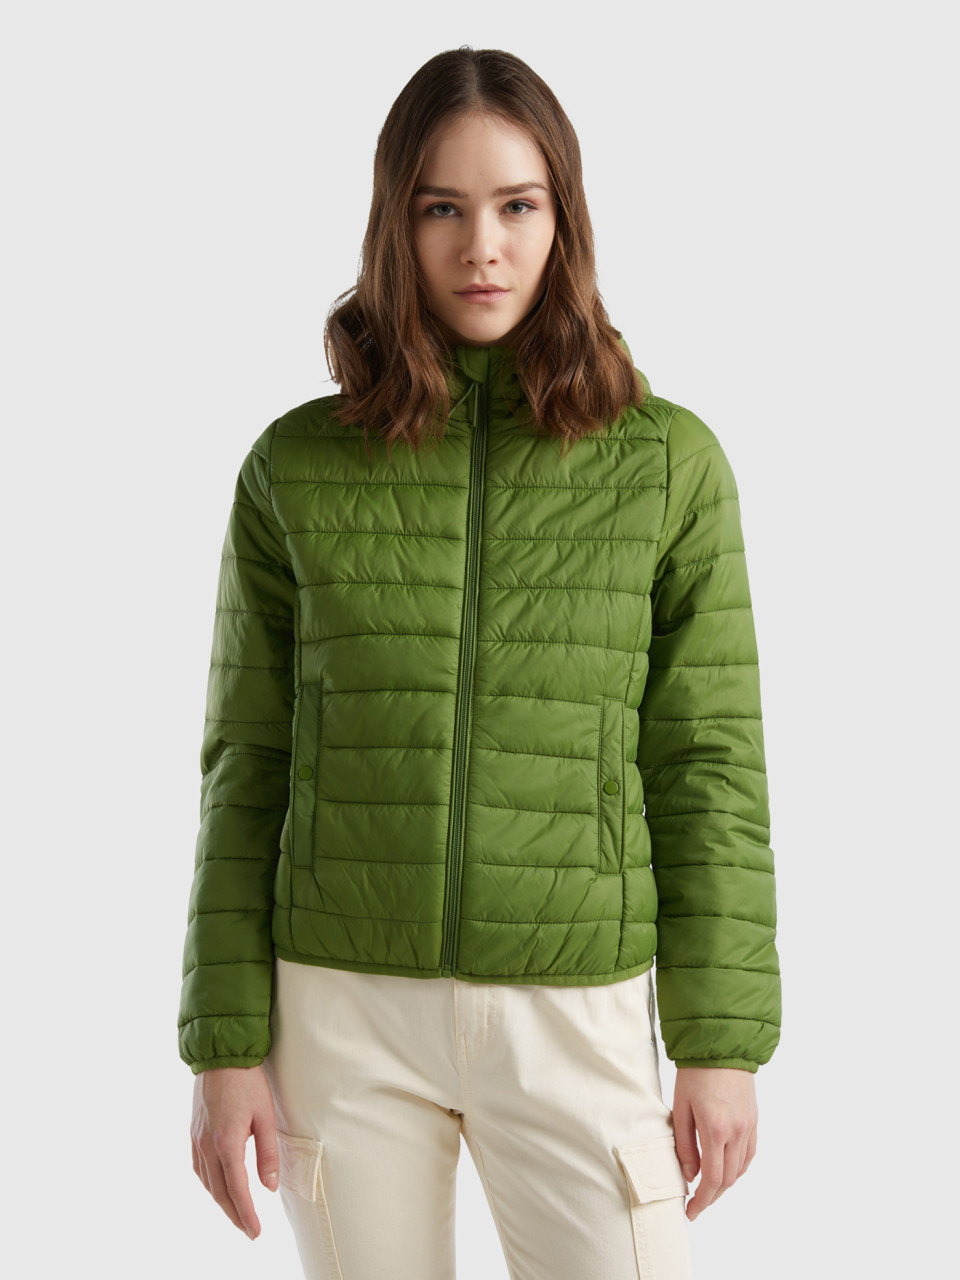 Benetton, Puffer Jacket With Recycled Wadding, Military Green, Women